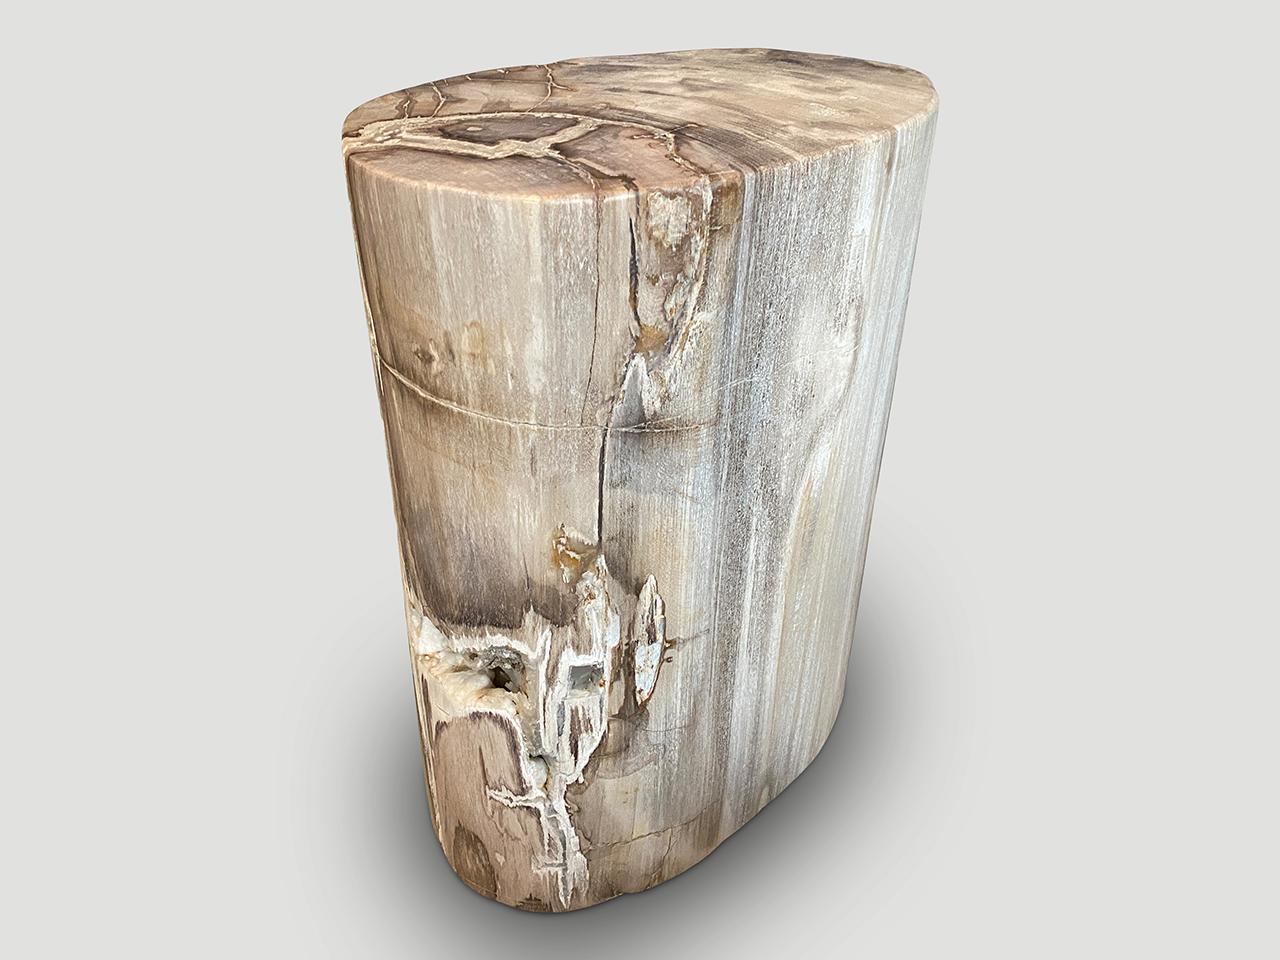 Andrianna Shamaris Exquisite High Quality Petrified Wood Side Table or Pedestal 1